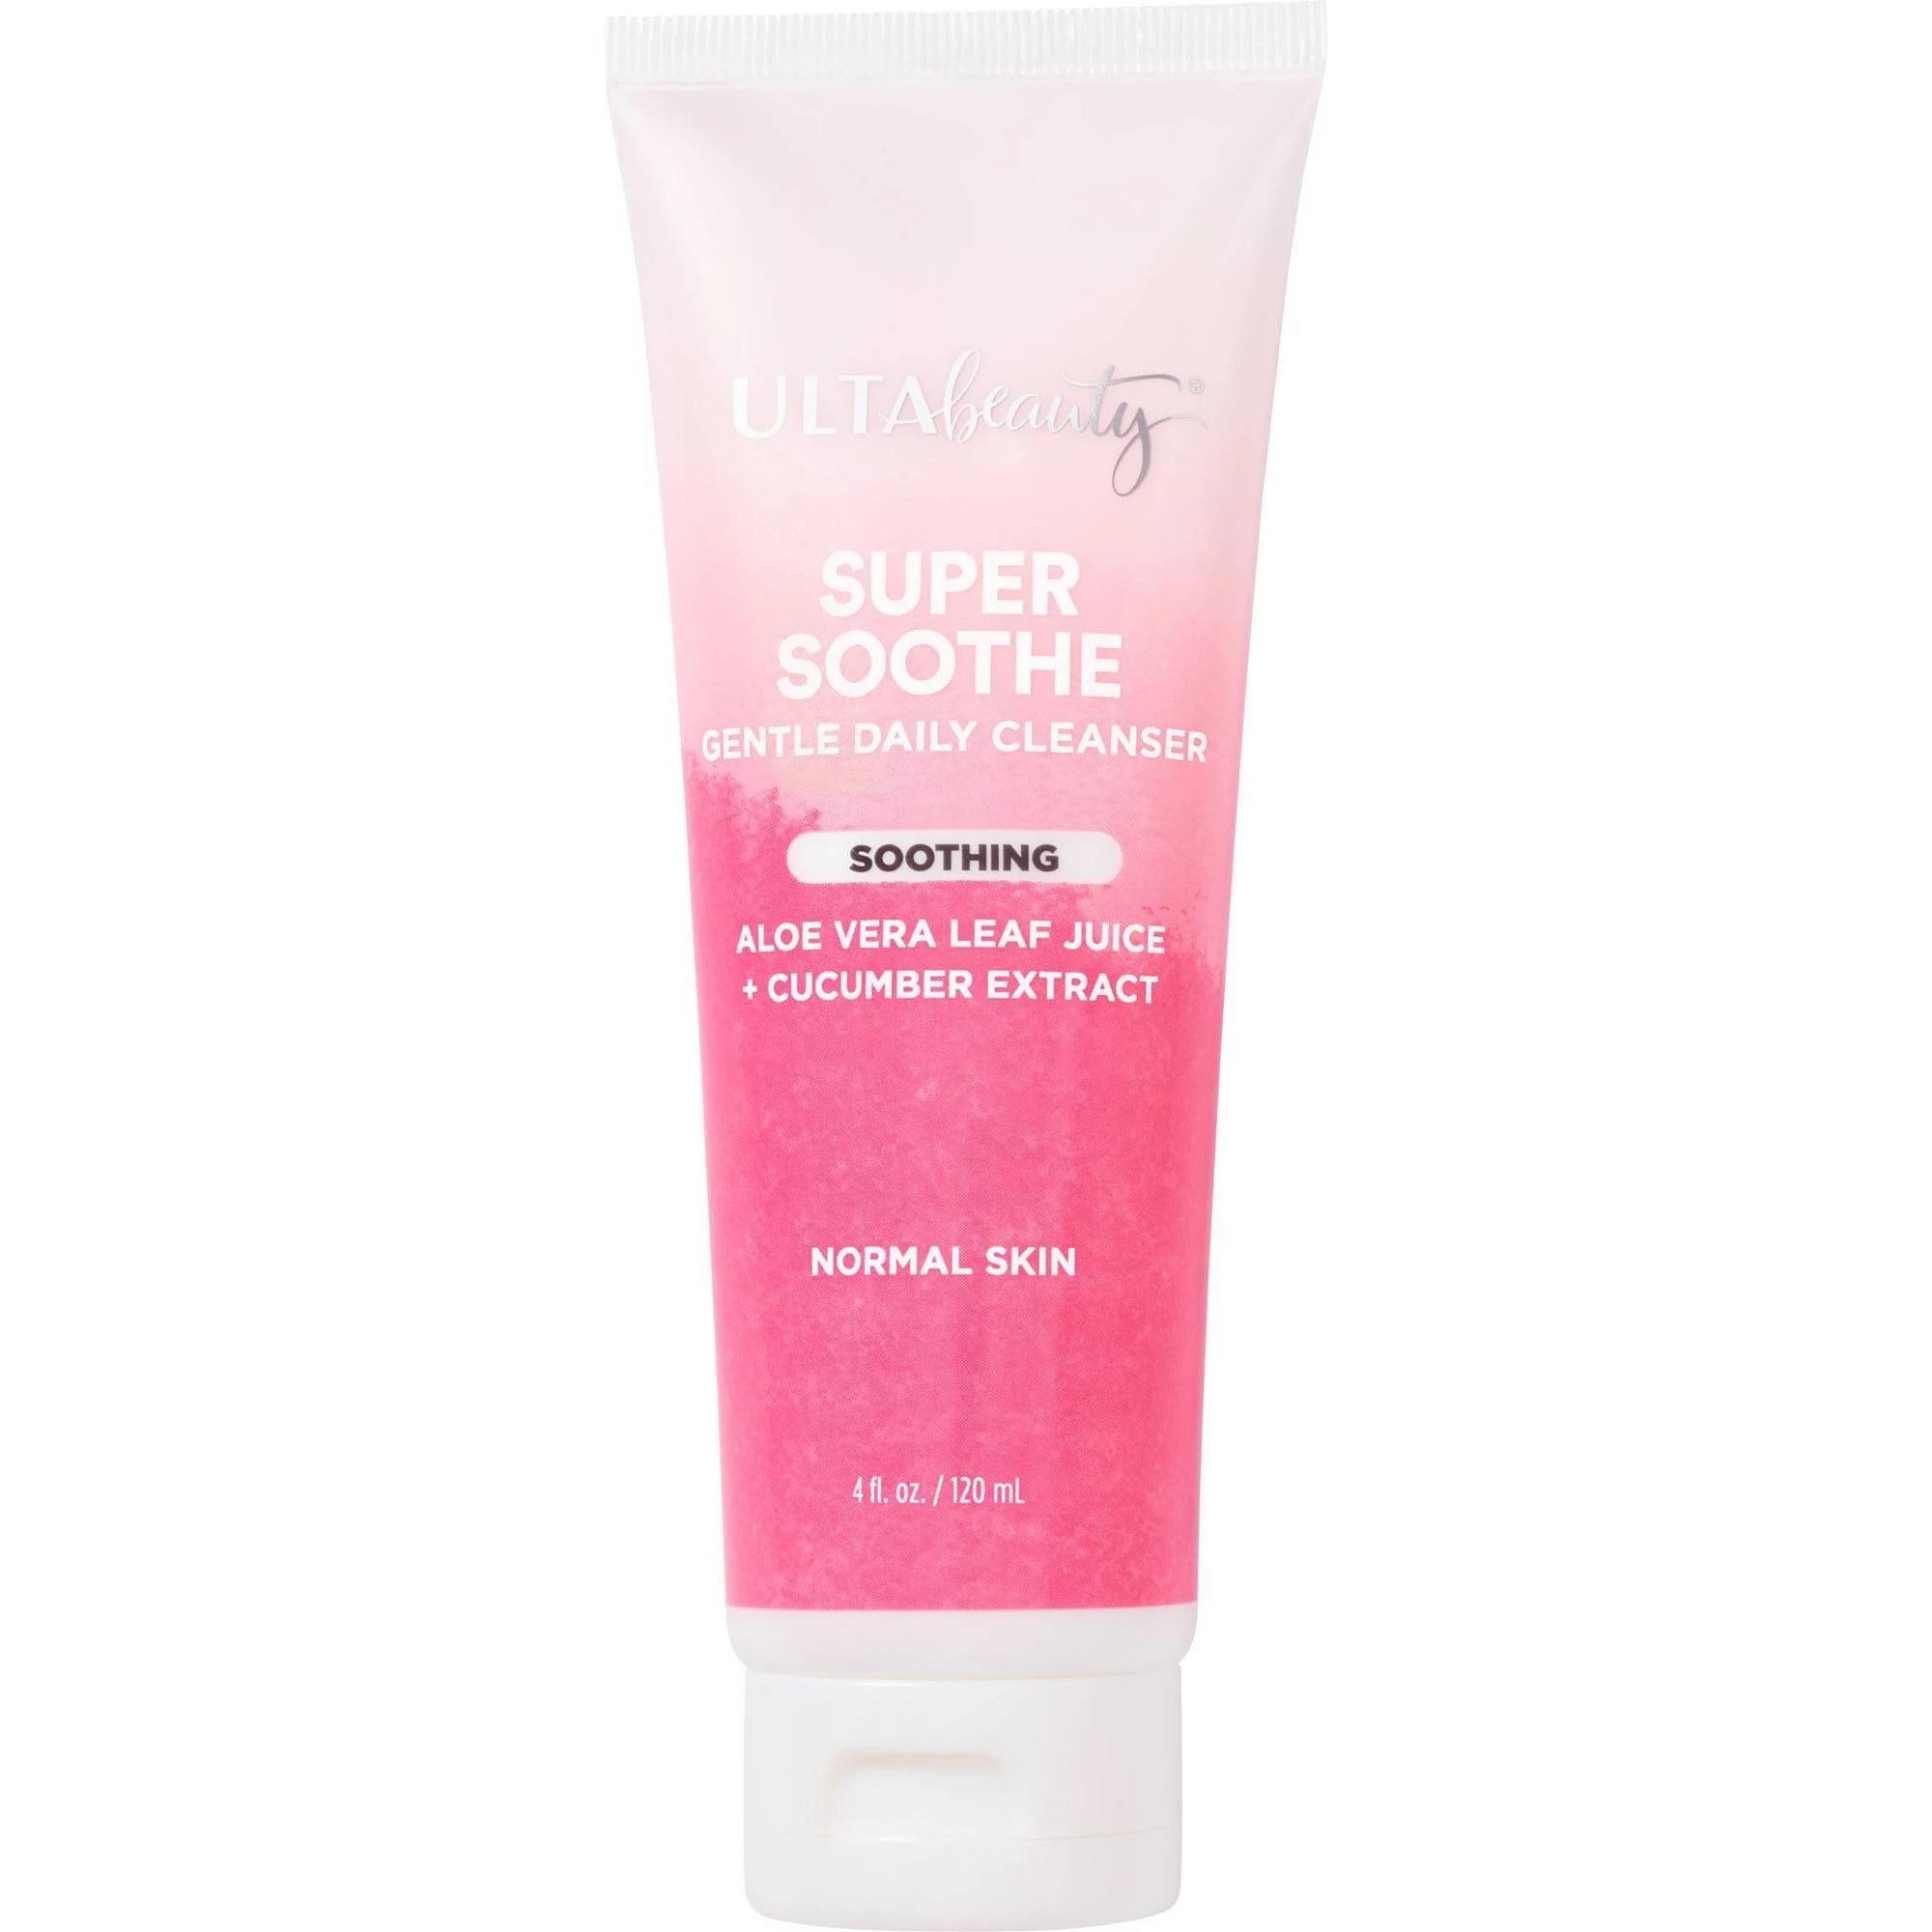 Ulta Beauty Collection Super Sooth Gentle Daily Cleanser Mini